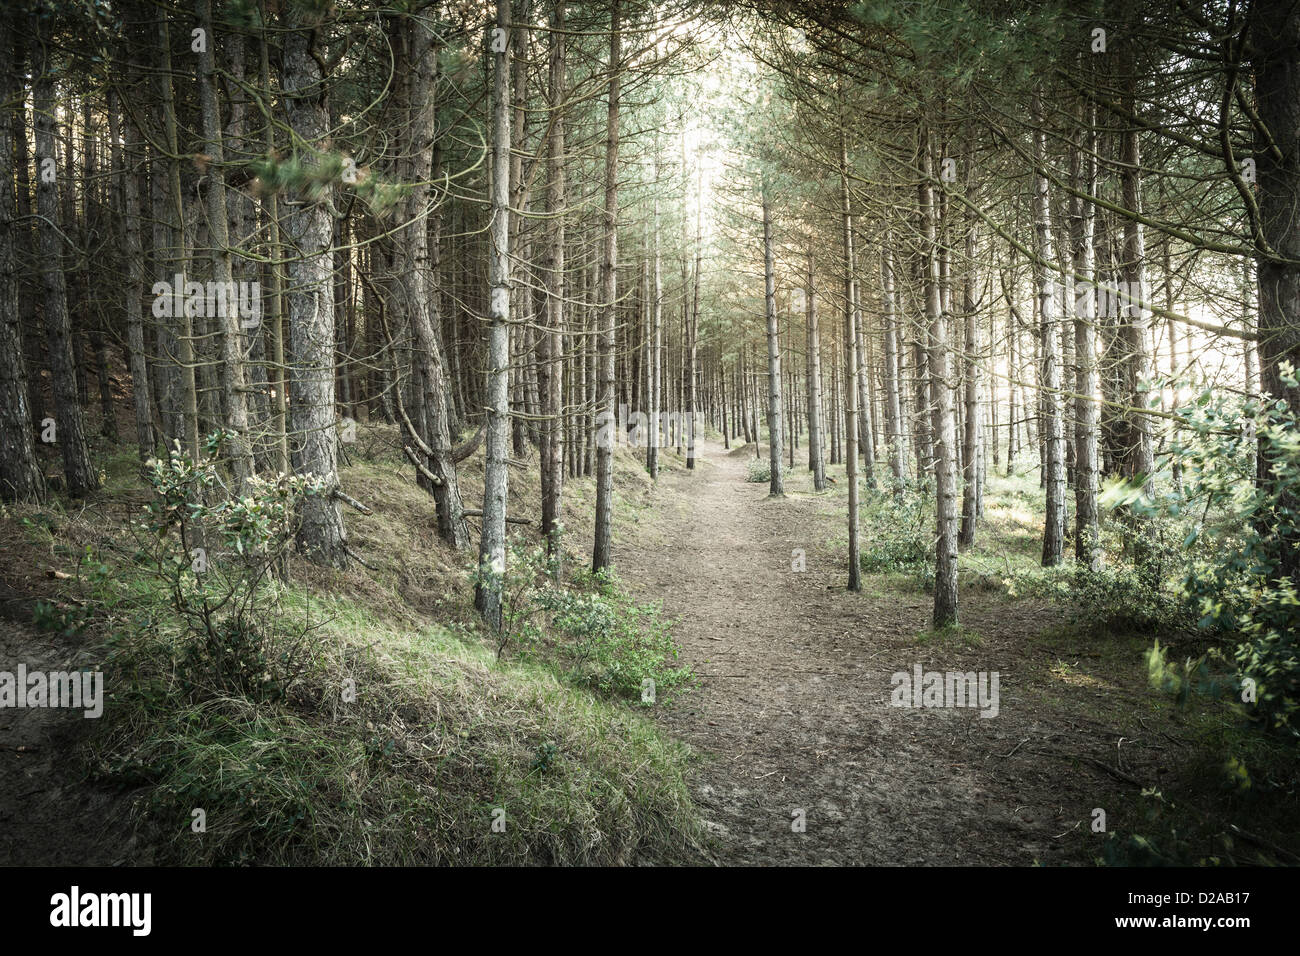 Dirt path in rural forest Stock Photo